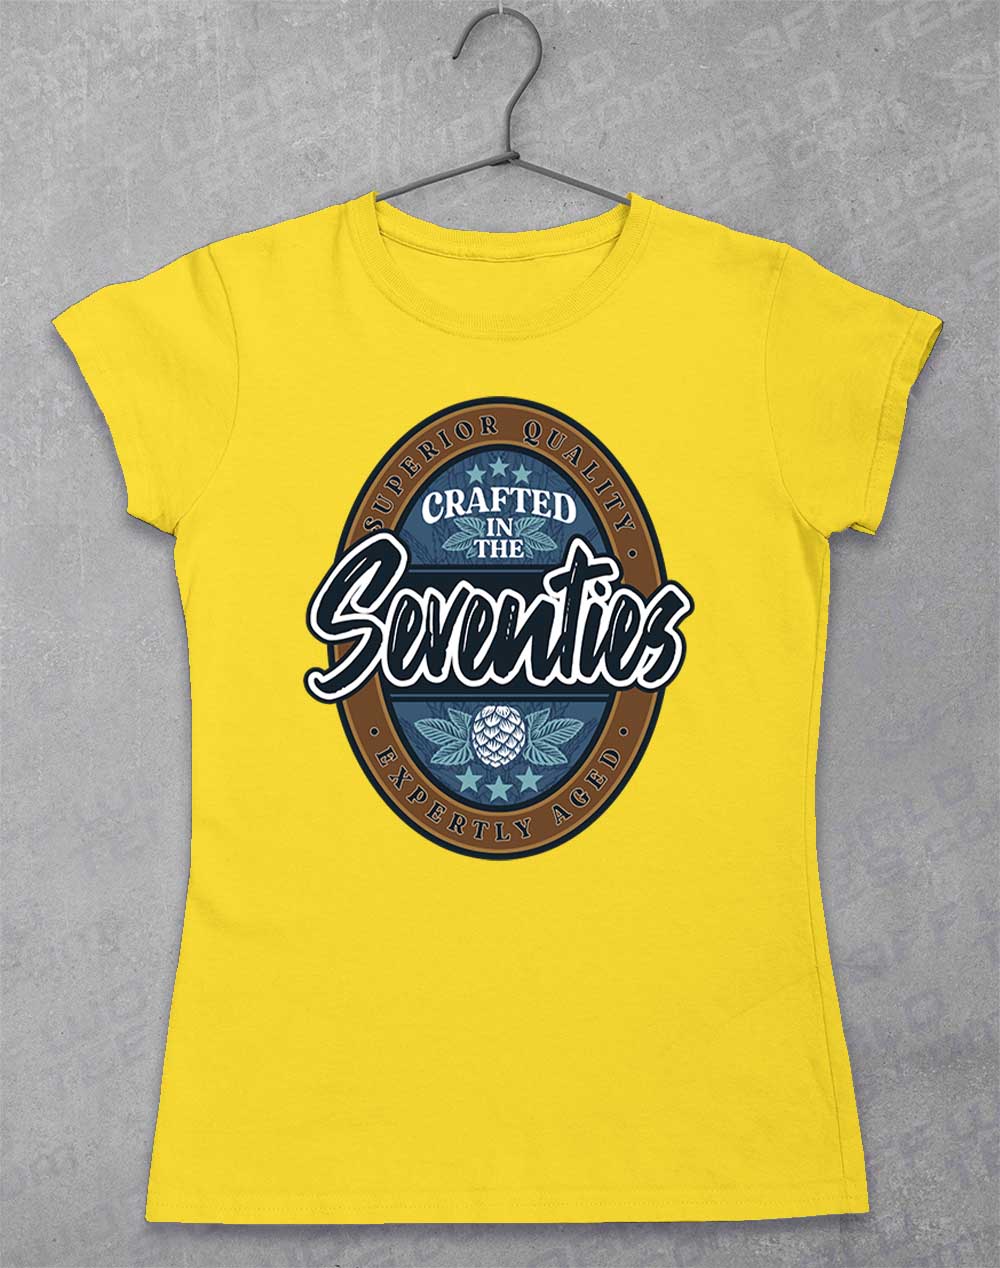 Crafted in the Seventies Women's T-Shirt